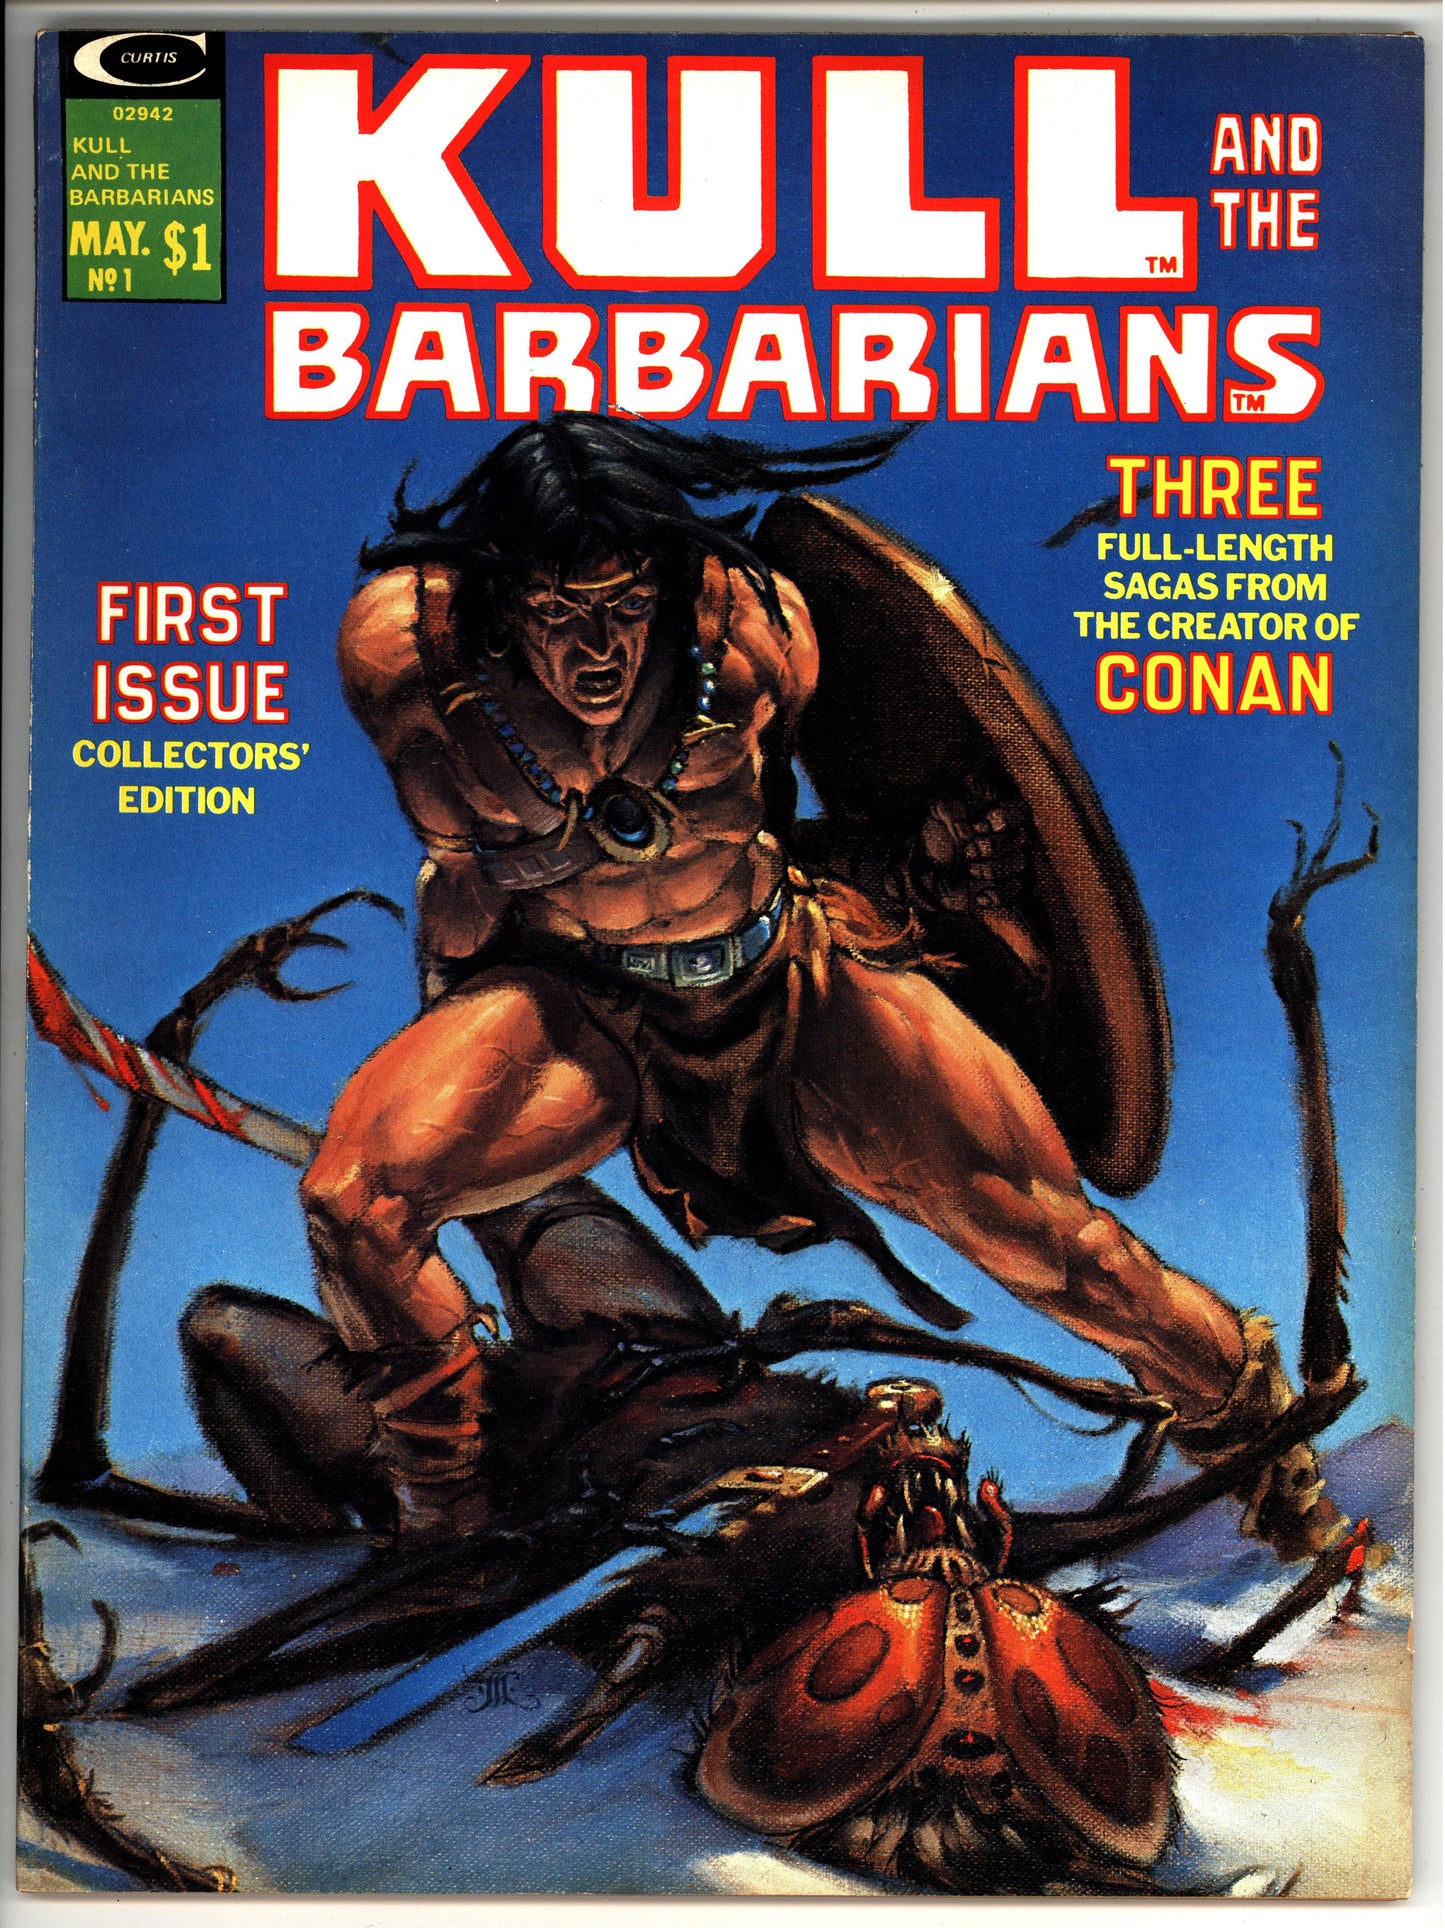 Kull and the Barbarians #1 (1975) Curtis Magazine